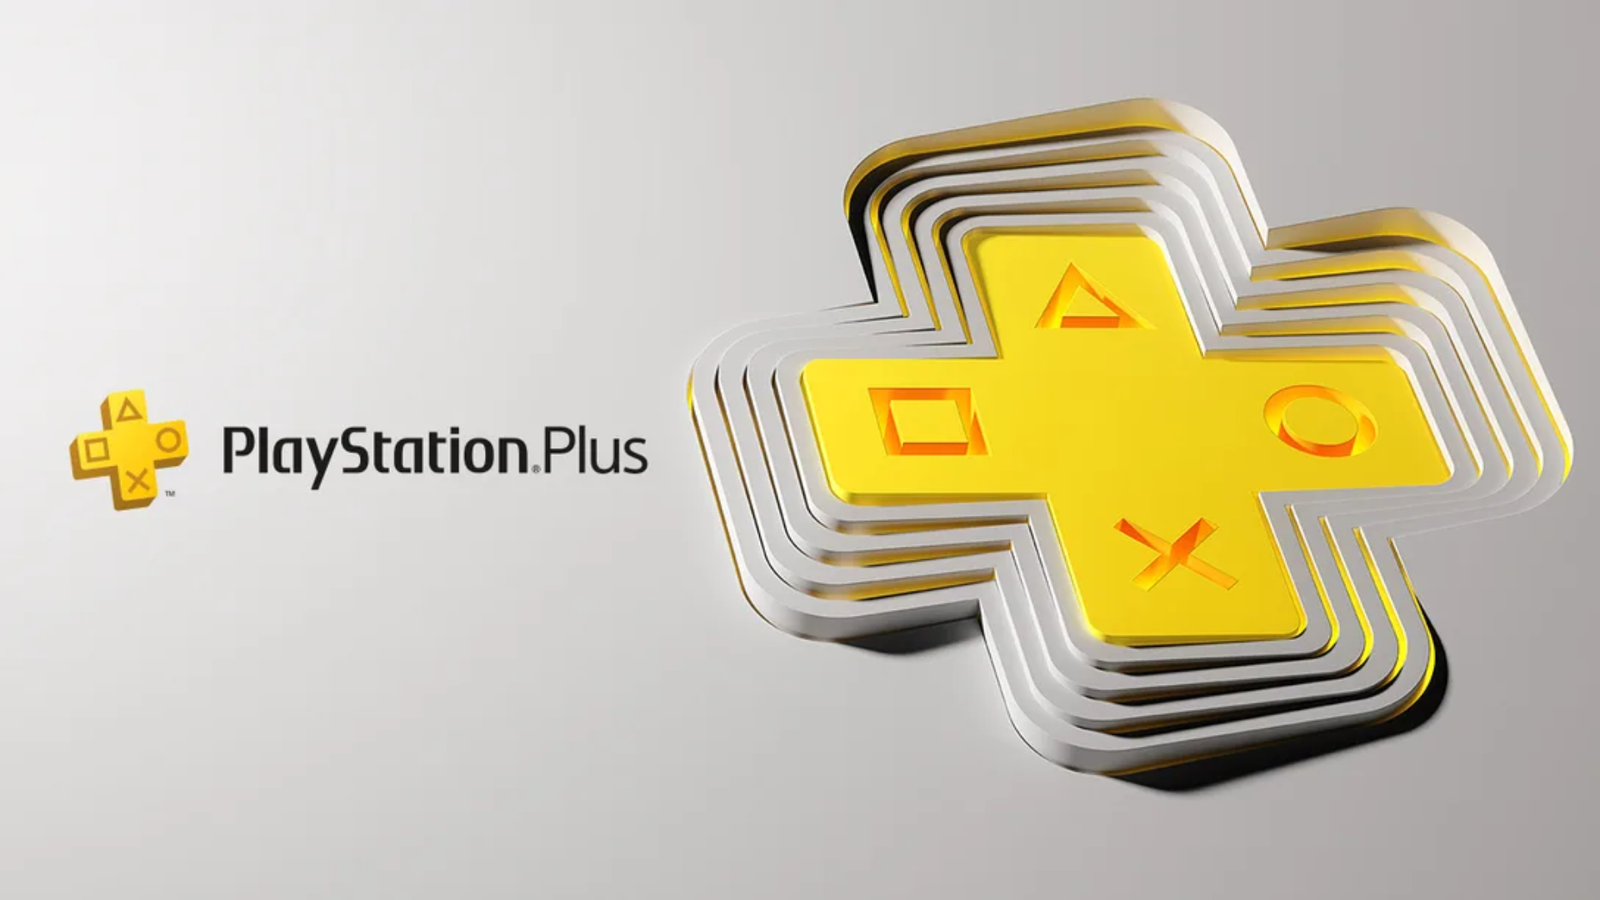 PlayStation Plus not working - how to fix PS+